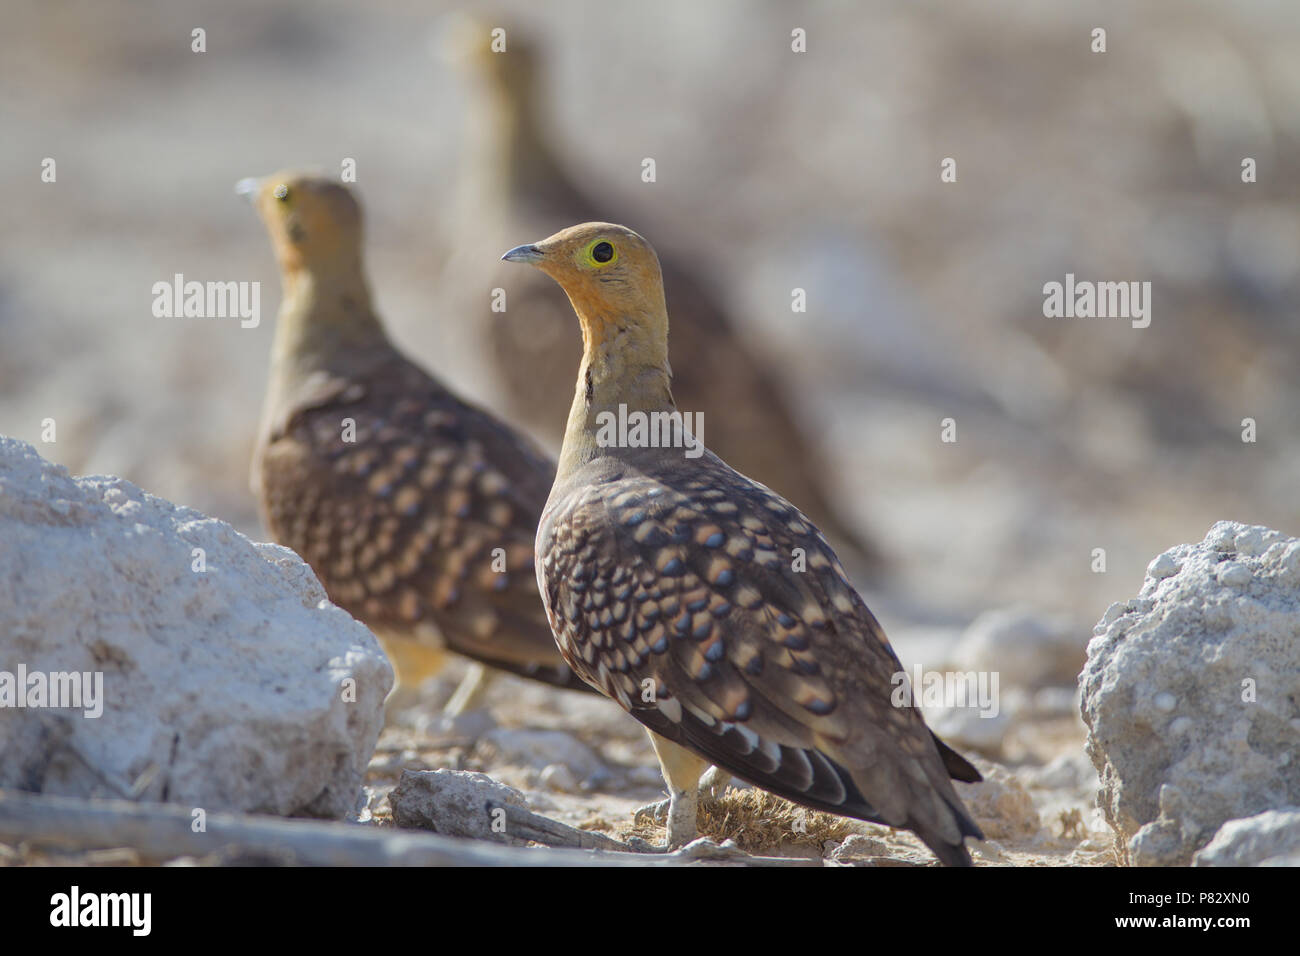 Sand grouse on the ground in Kgalagadi  Plain Stock Photo